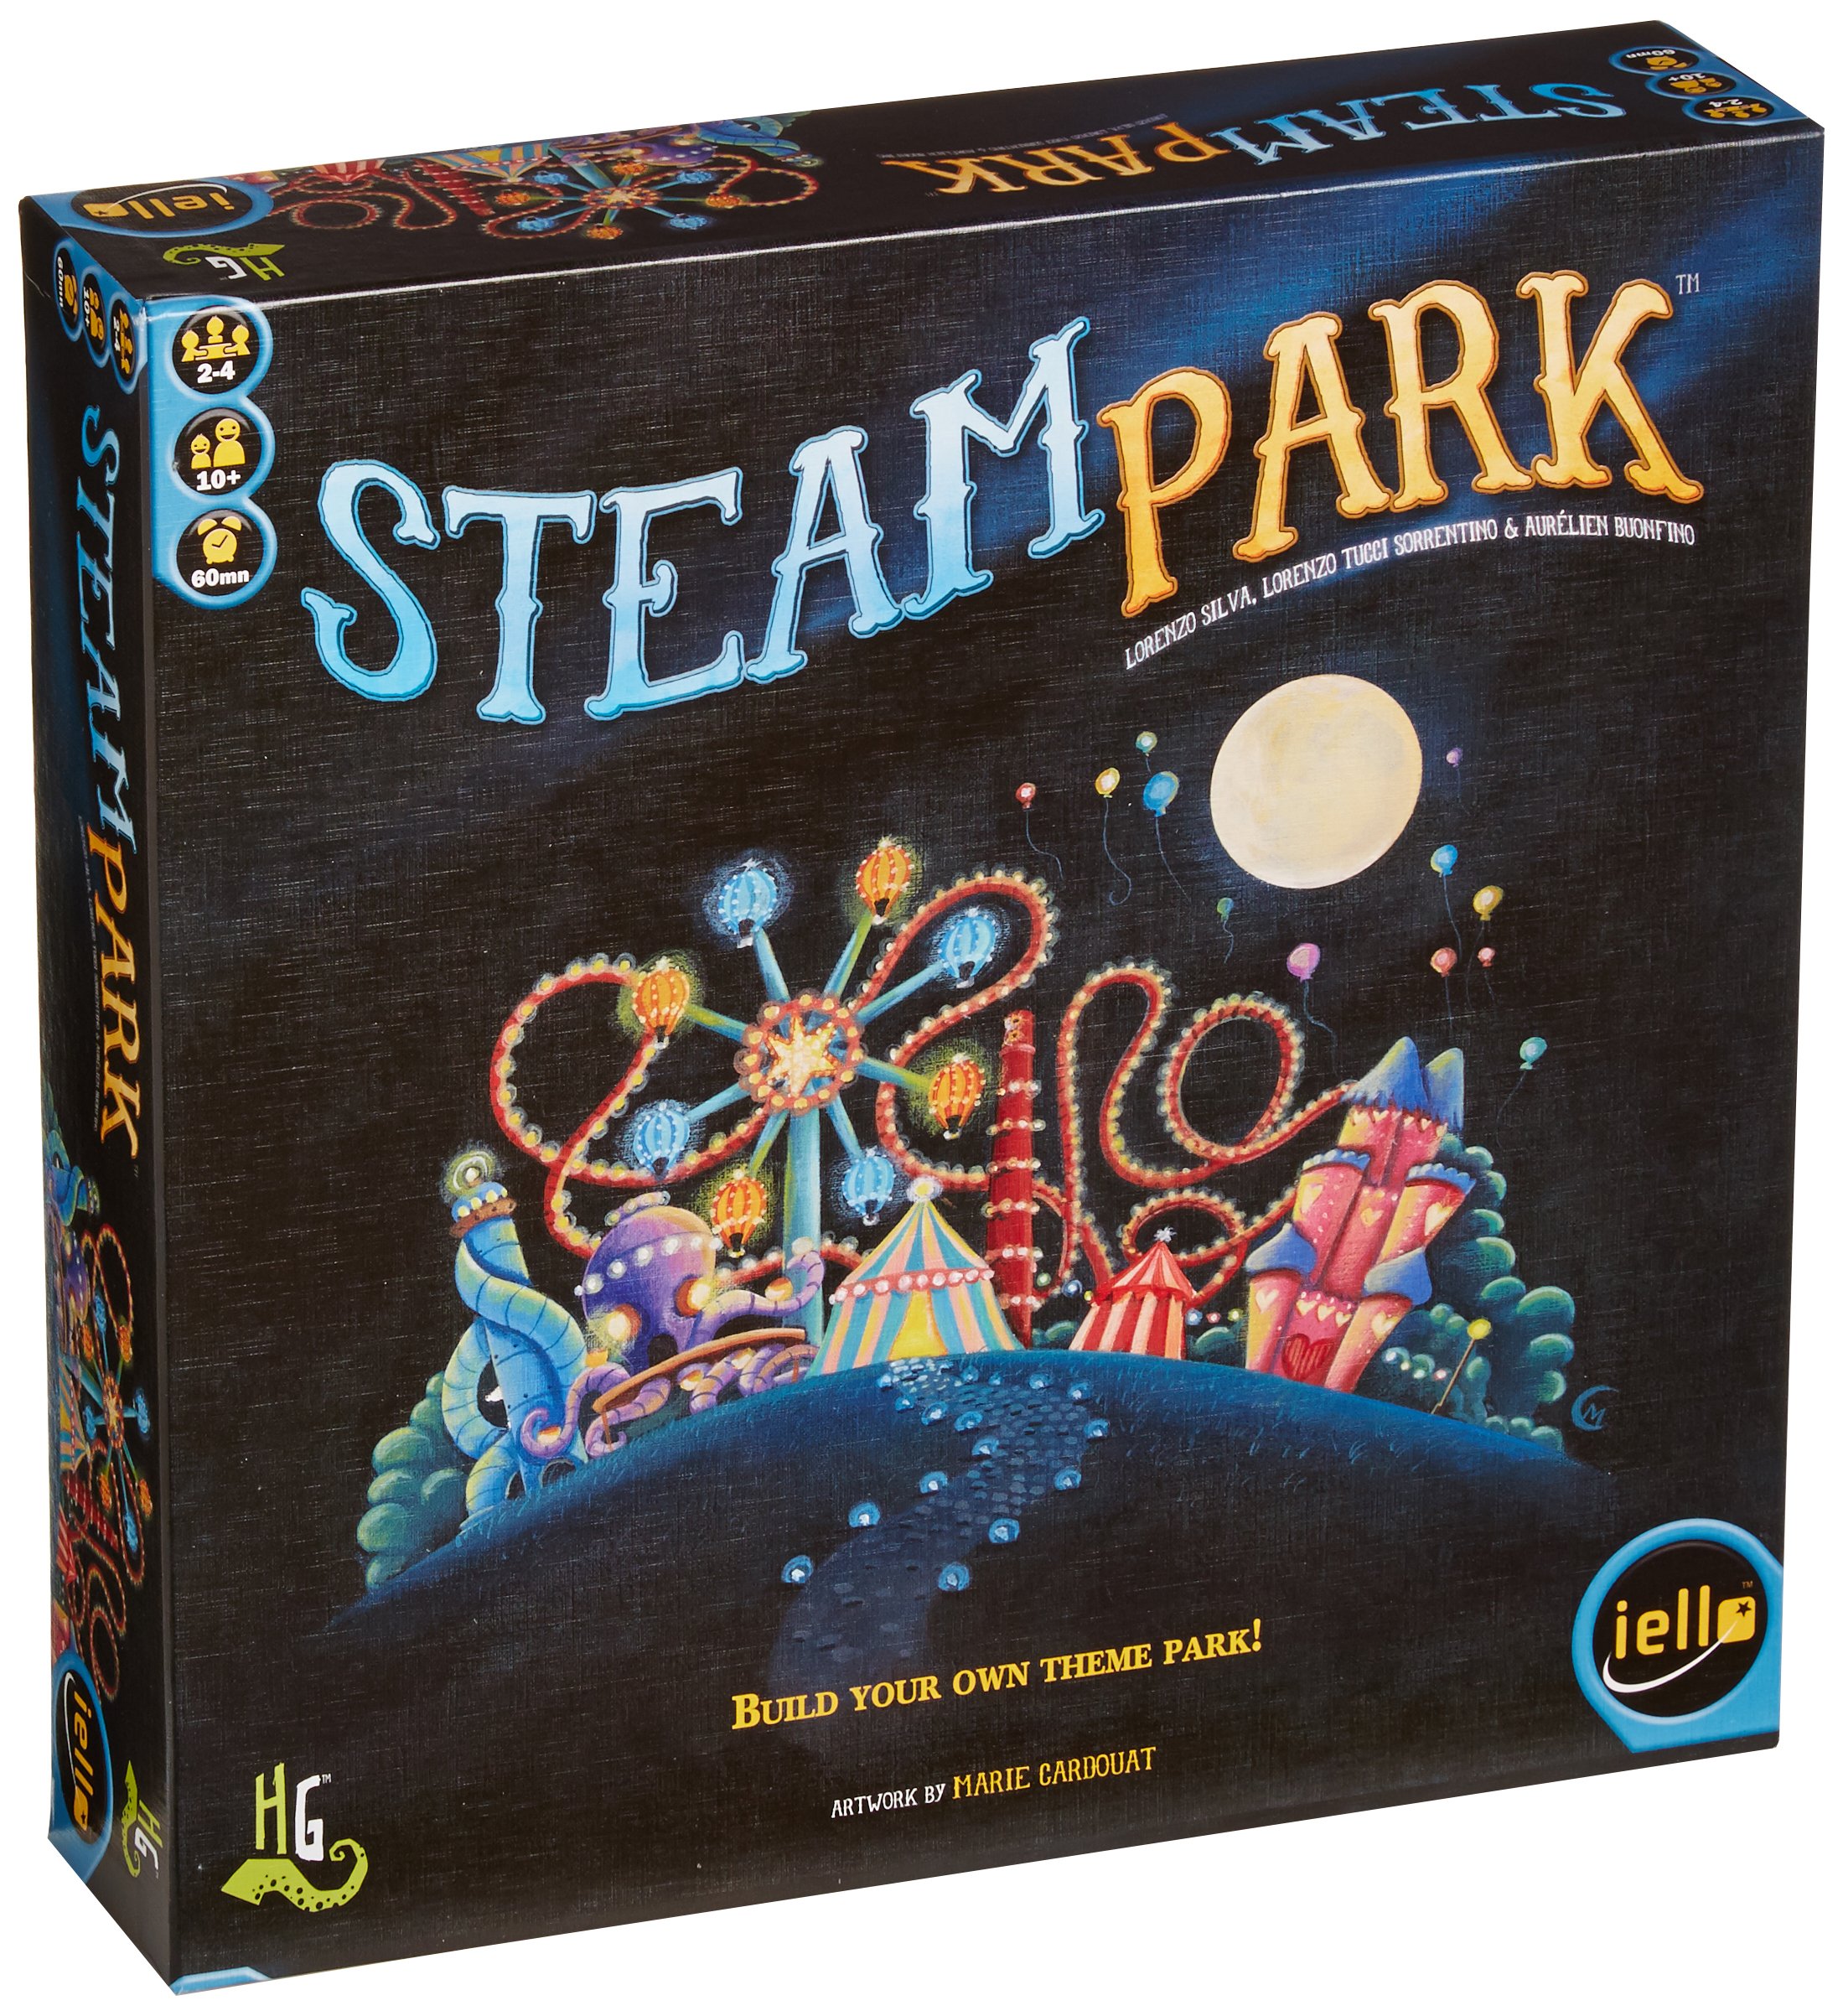 Steam Park Game by Iello Games $19.75 + Free Shipping w/ Prime or on $25+